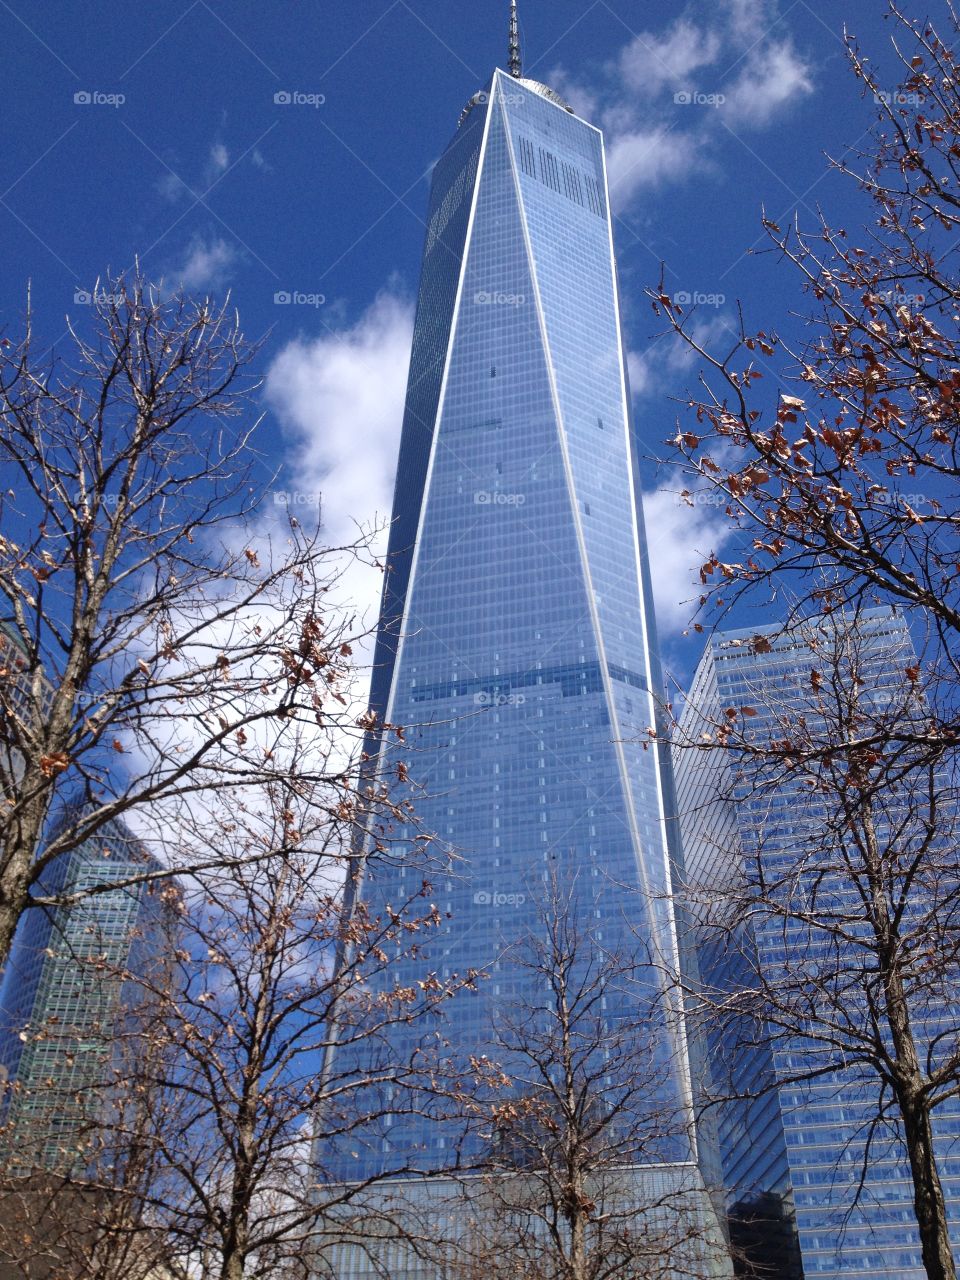 Freedom tower 